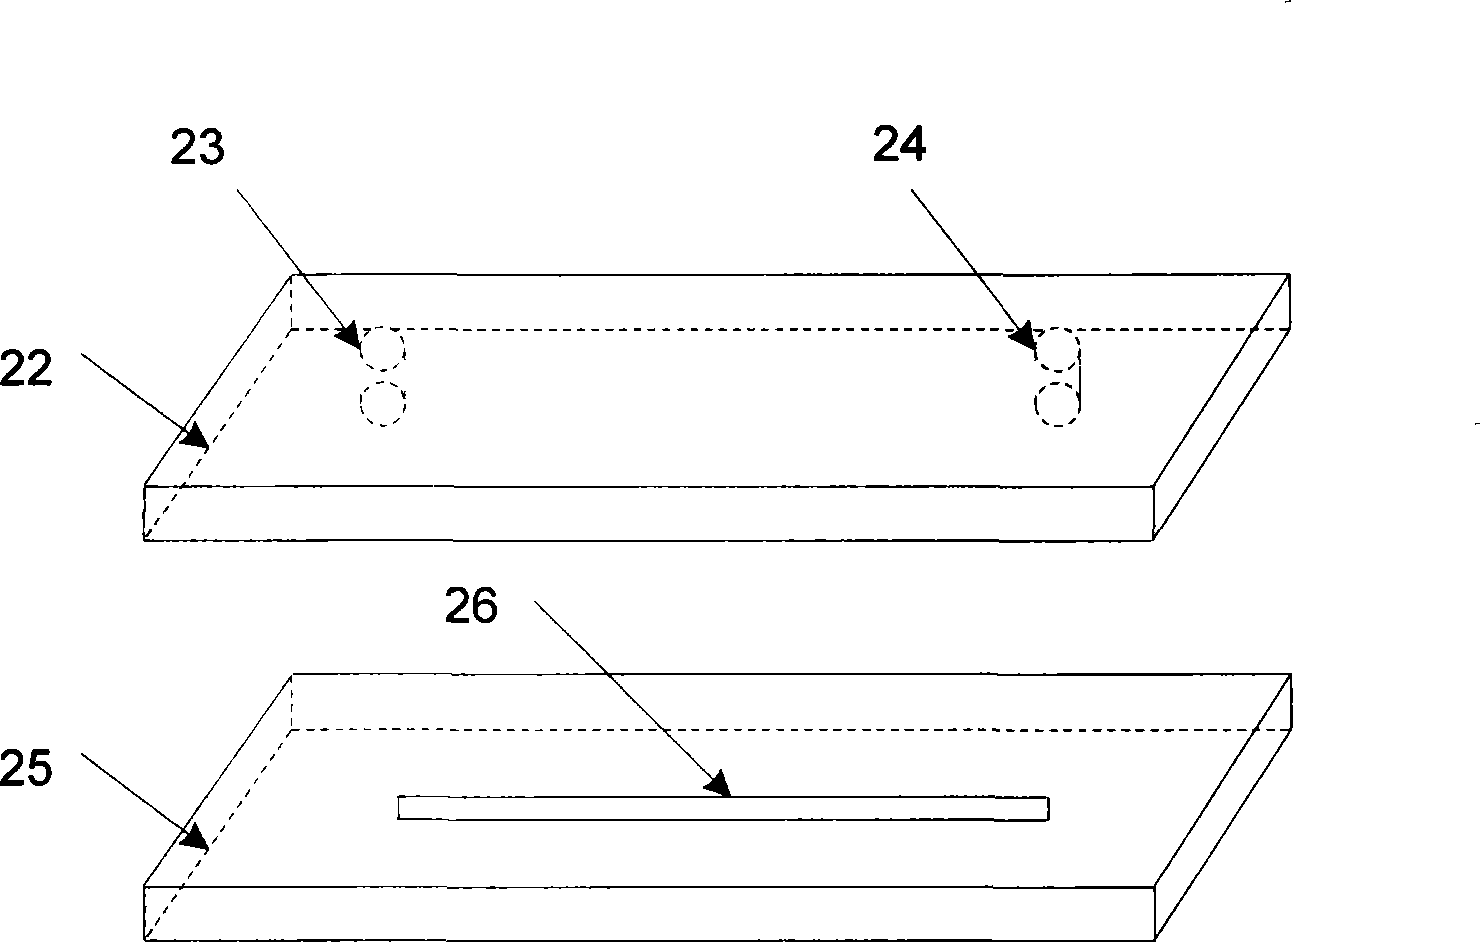 Oil liquid abrasive grain on-line monitoring method and system